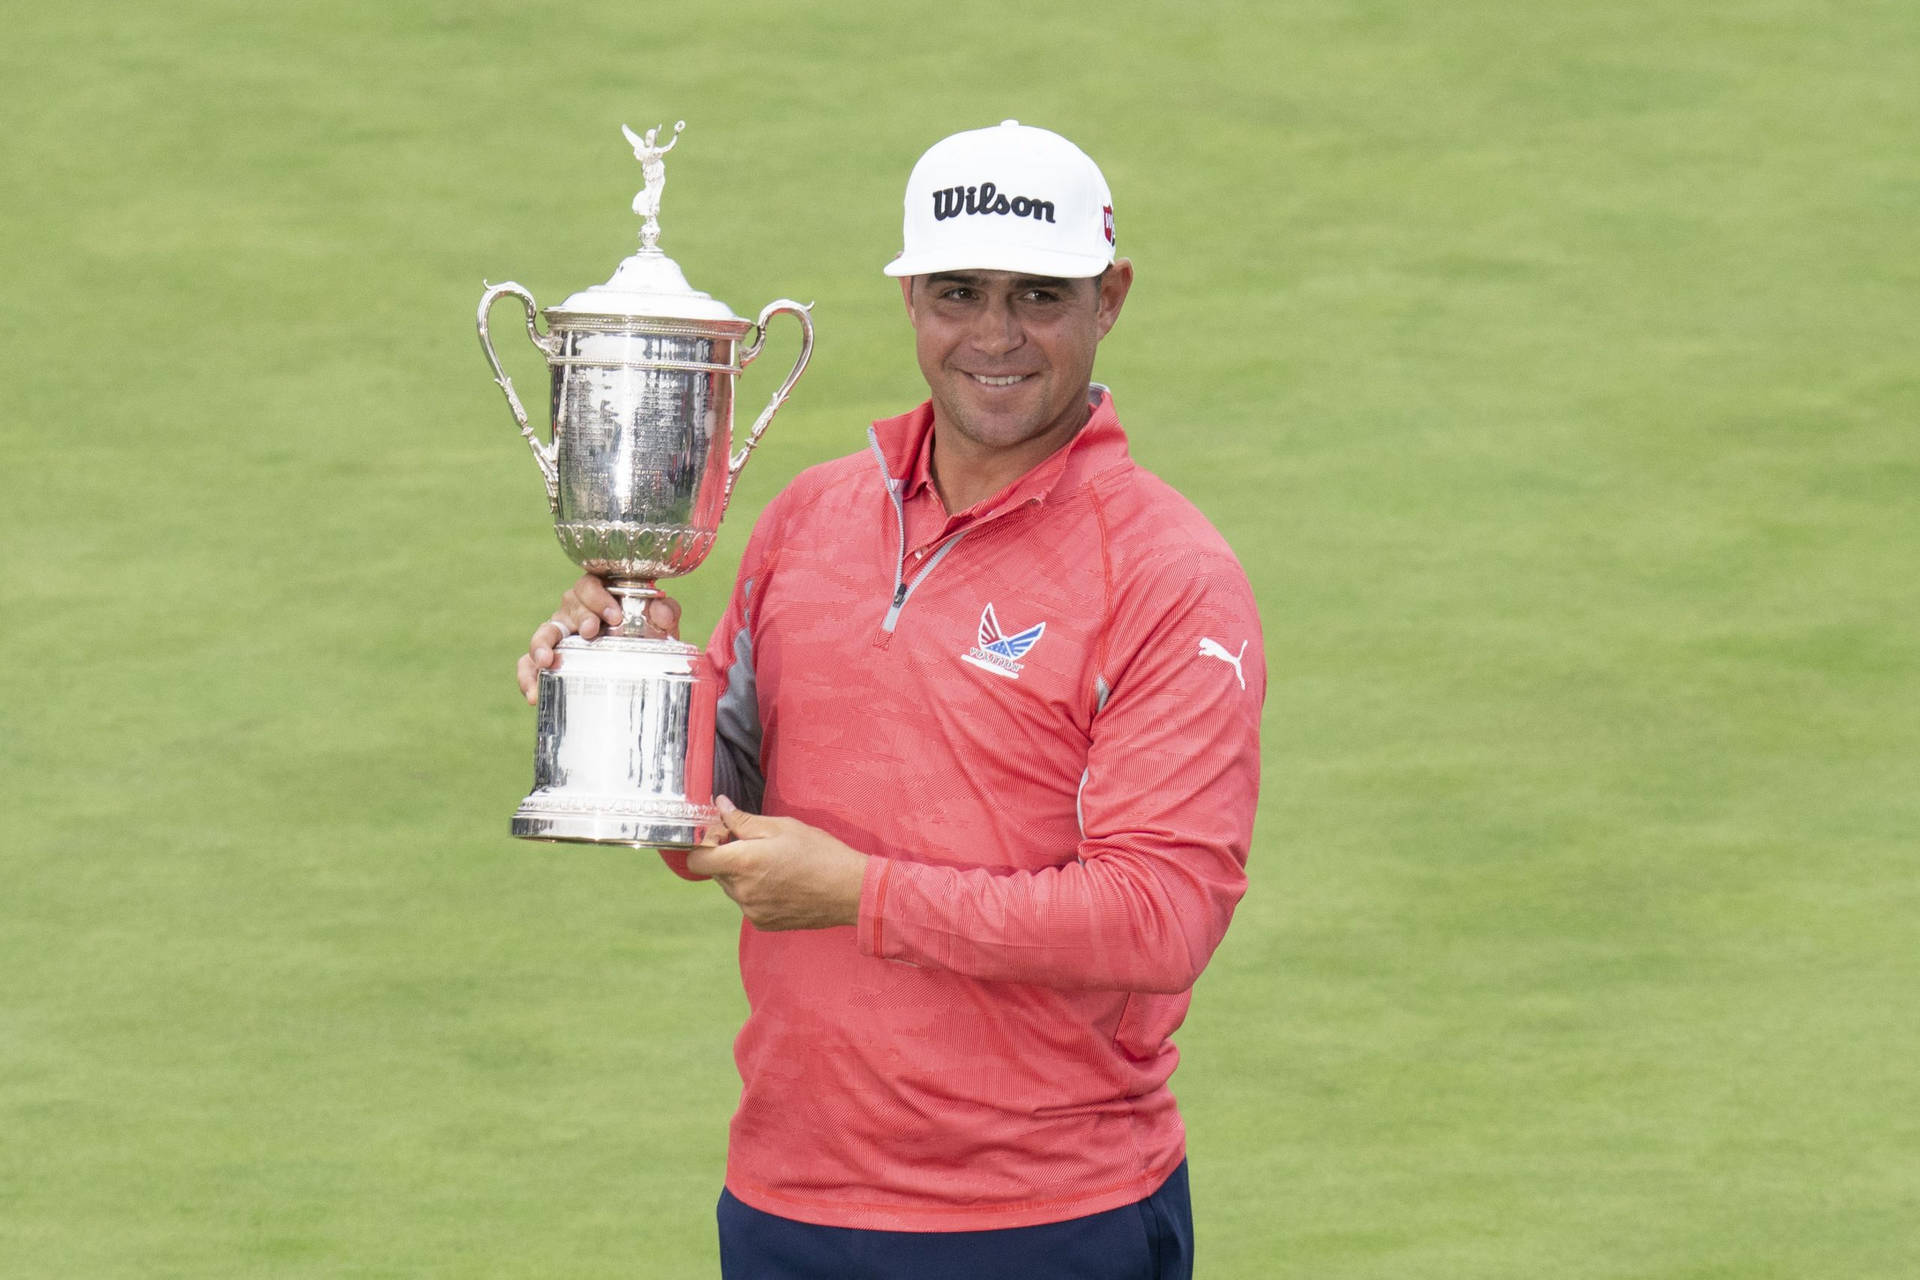 Garywoodland Presenterar Trofén. (assuming This Is The Text That Would Be Added To The Wallpaper). Wallpaper